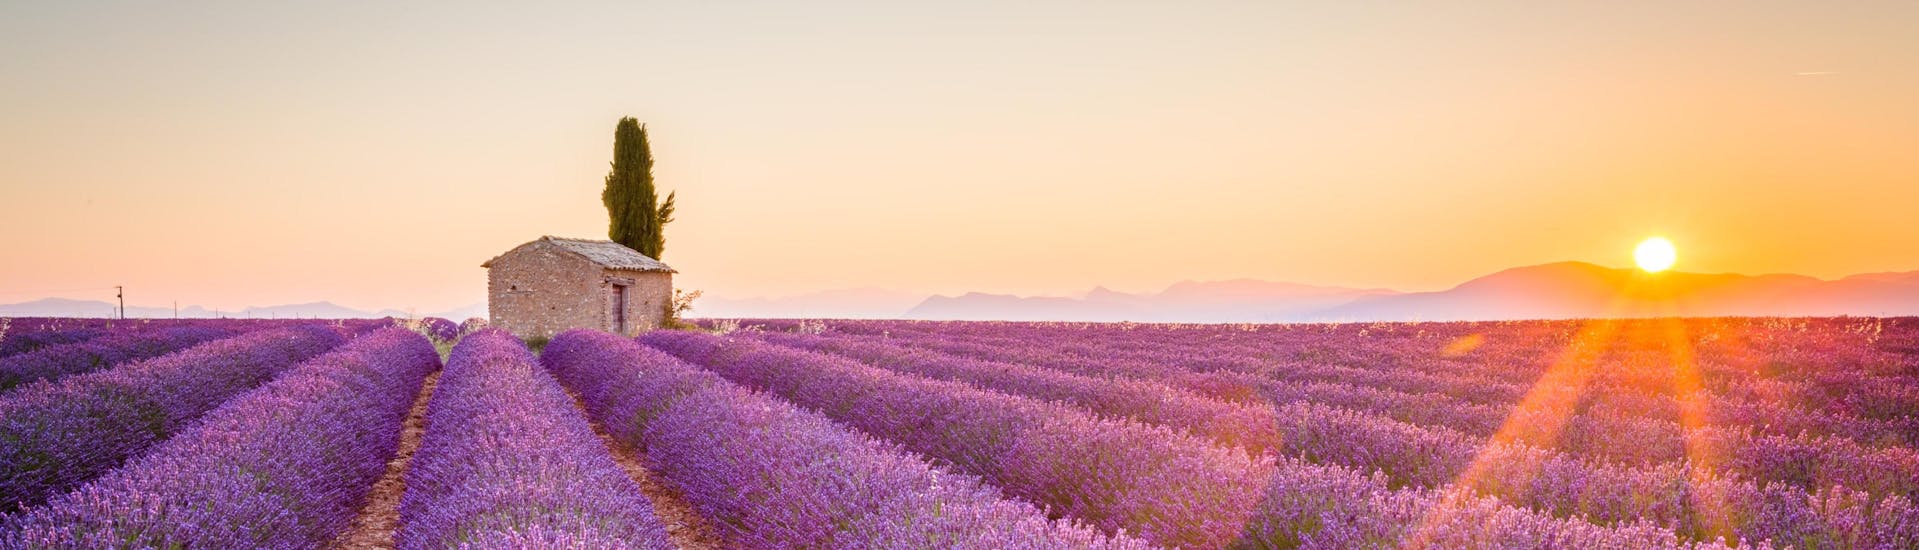 View of the lavender fields of the famous Valensole plateau in Provence.